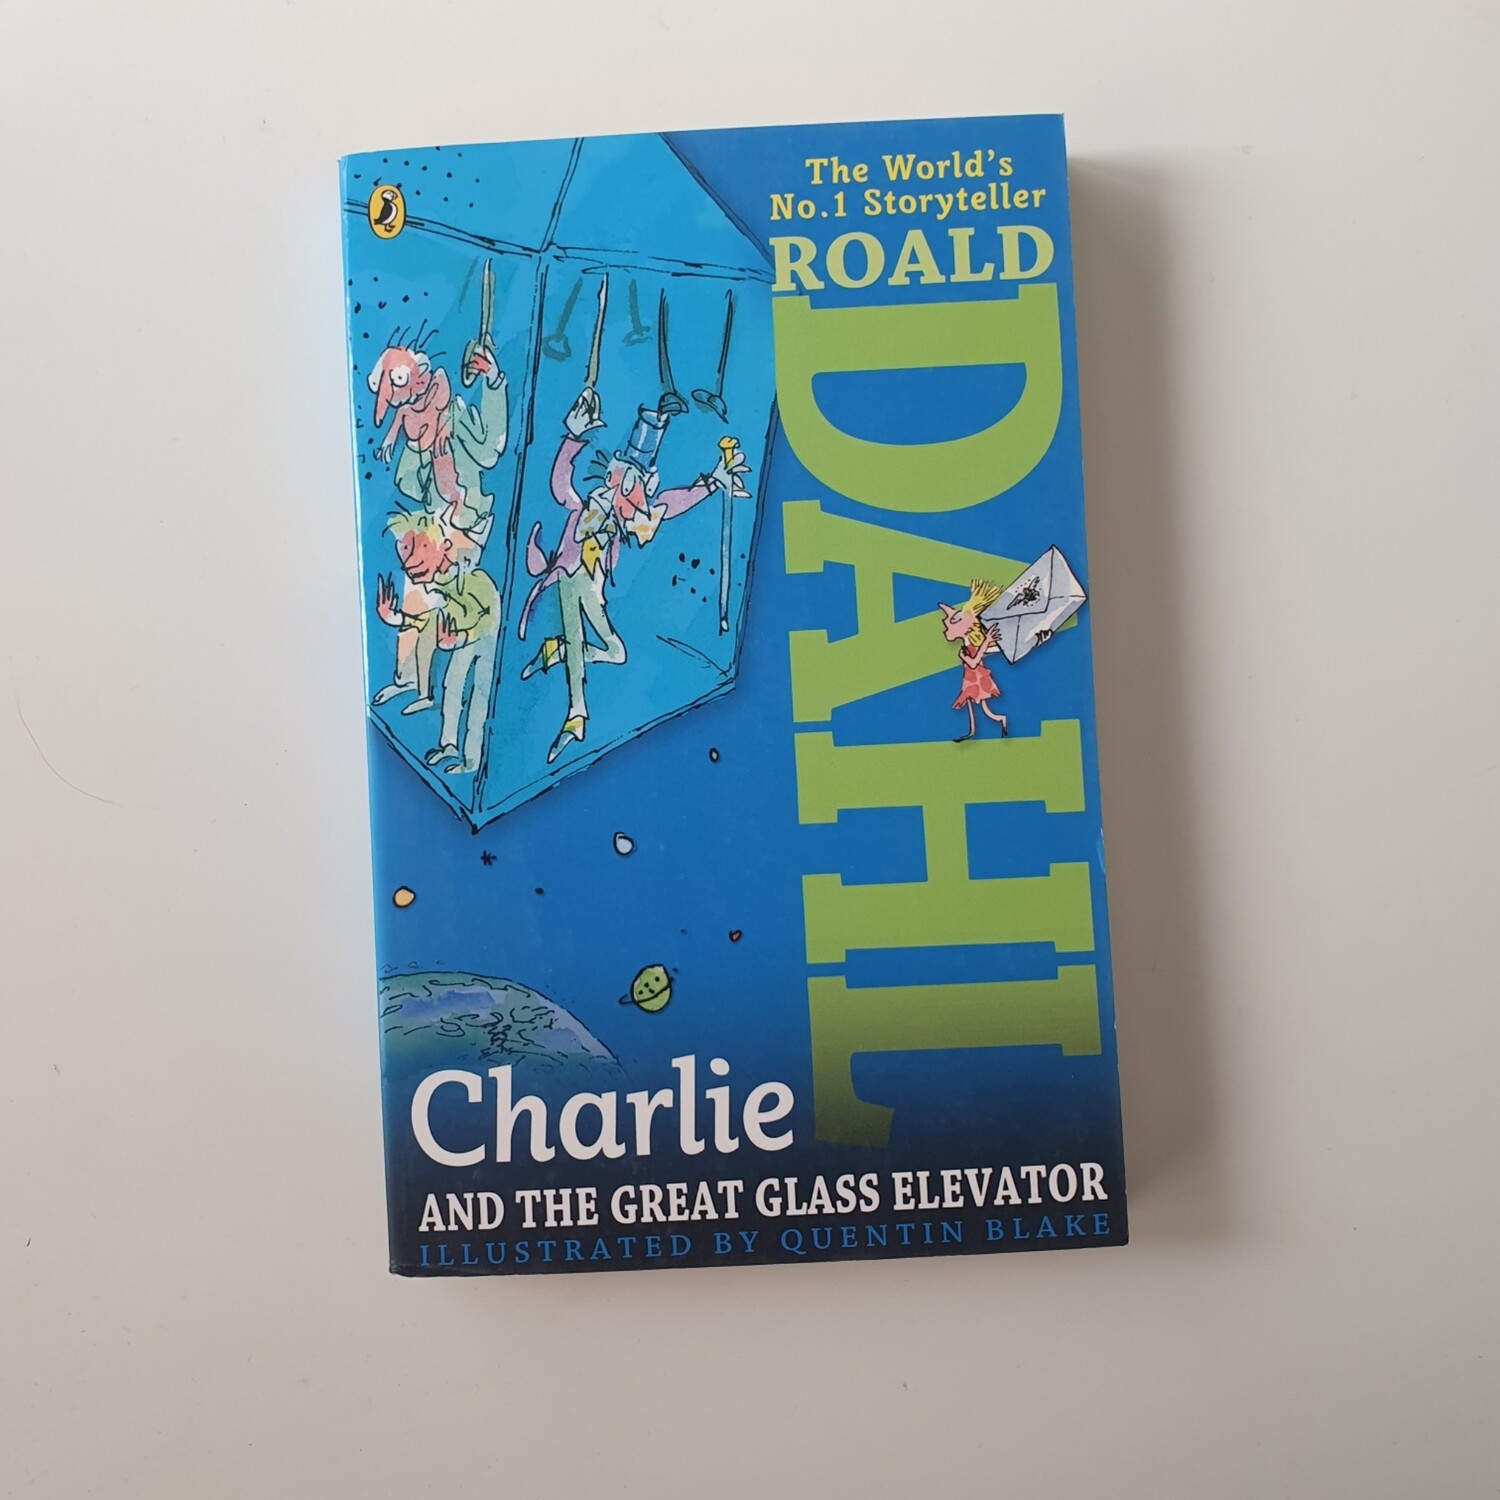 Roald Dahl Charlie and the Great Glass Elevator Notebook - made from a paperback book